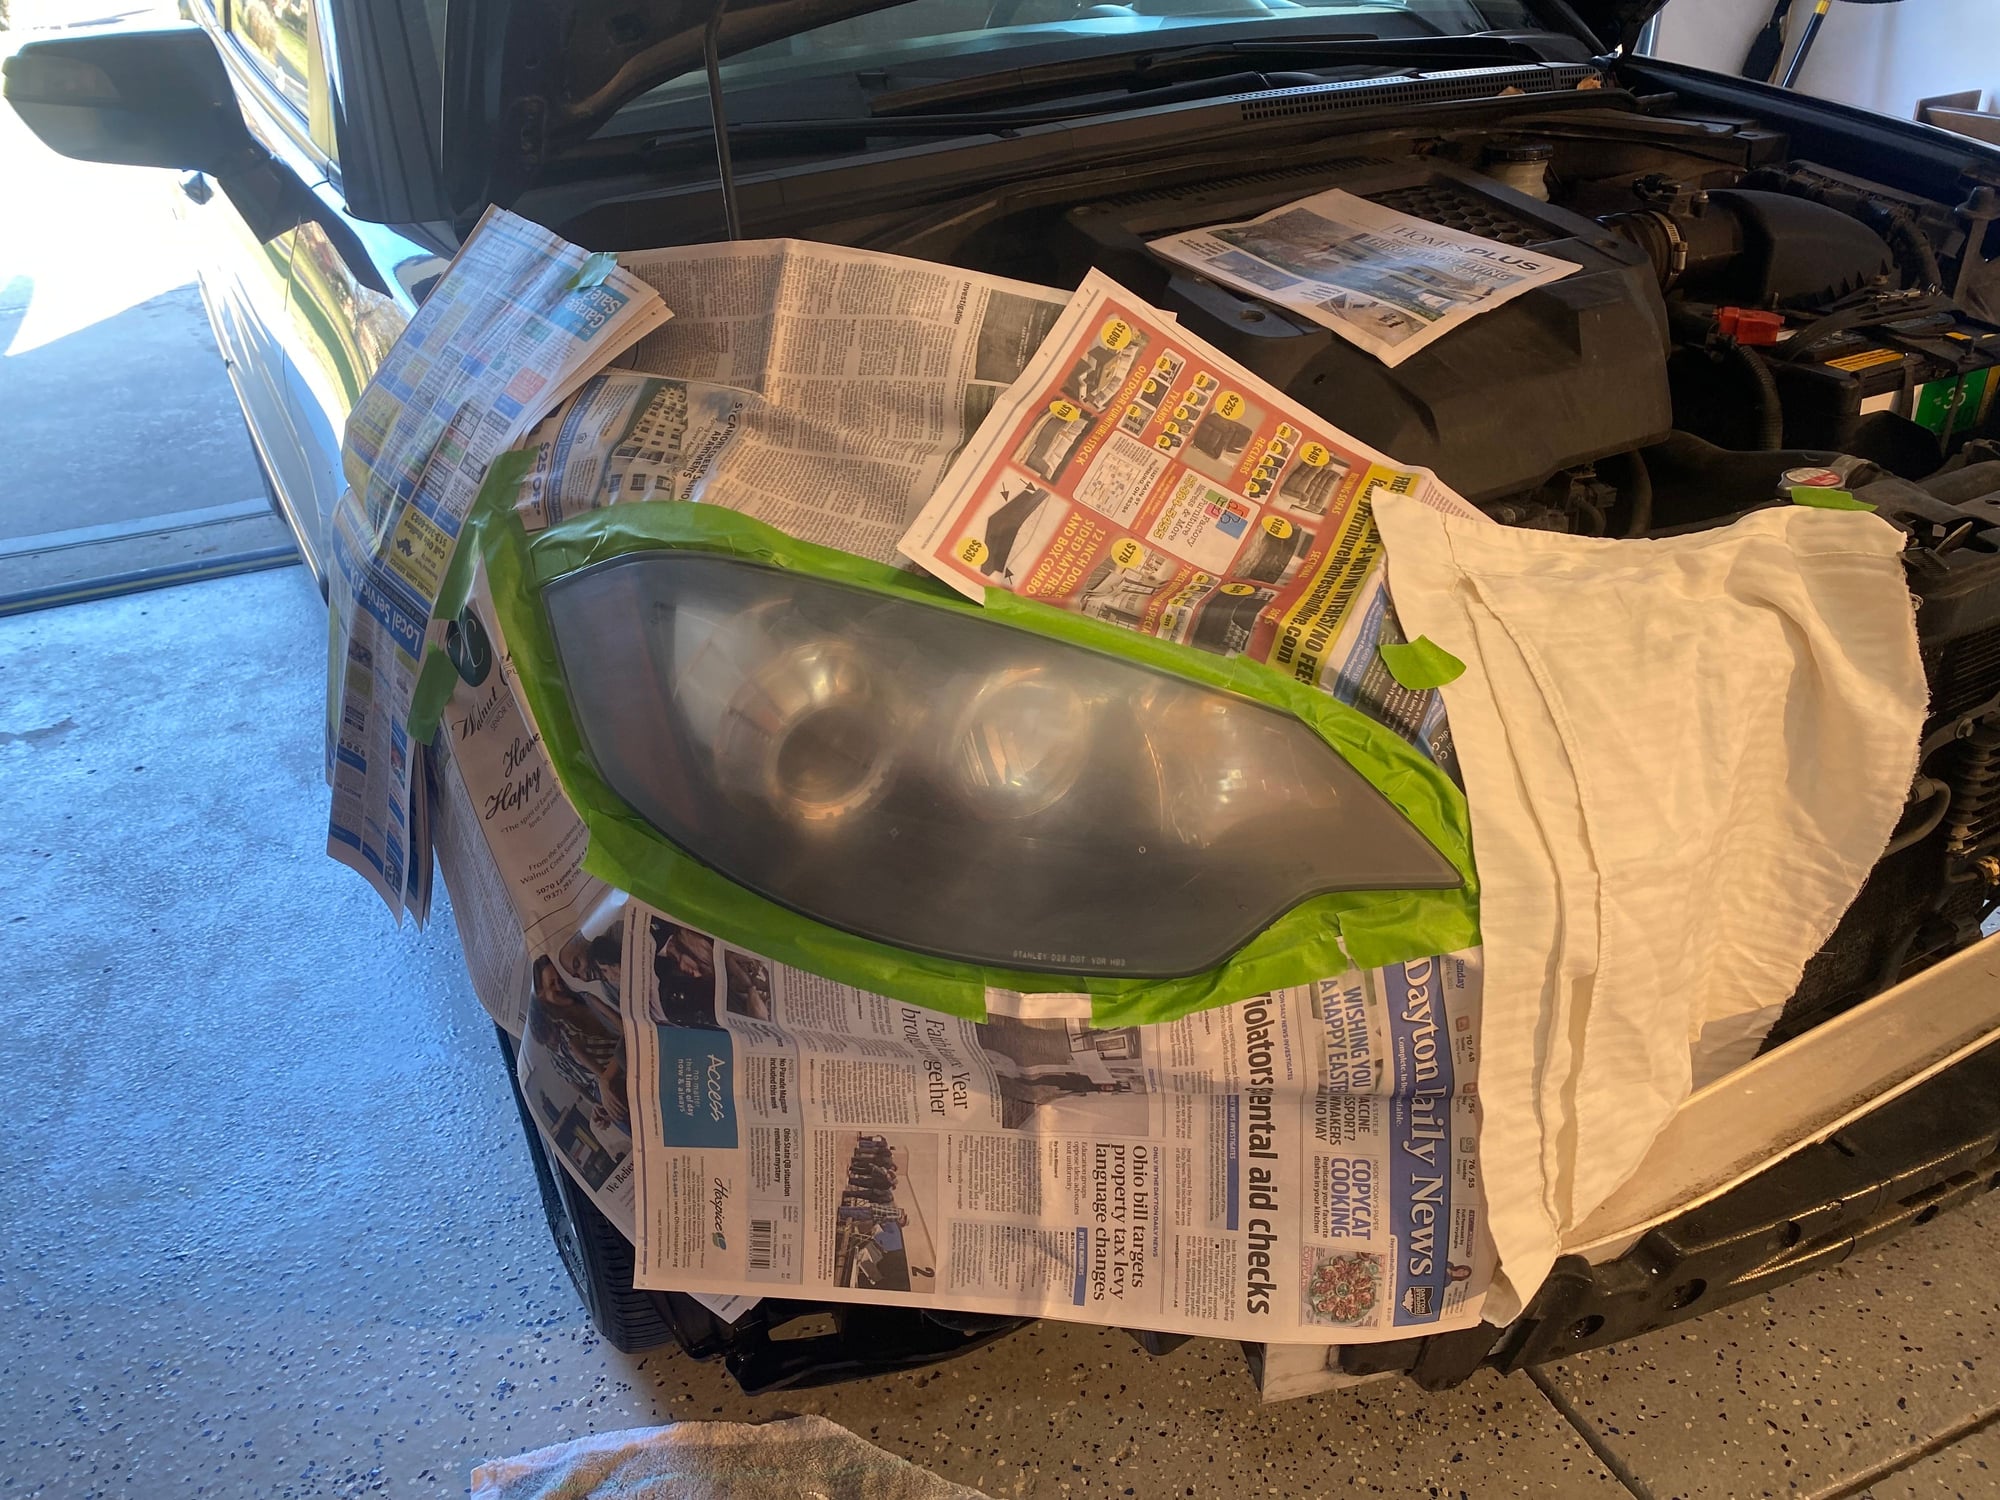 How to Restore Faded Plastic Headlights Using Clear Coat 